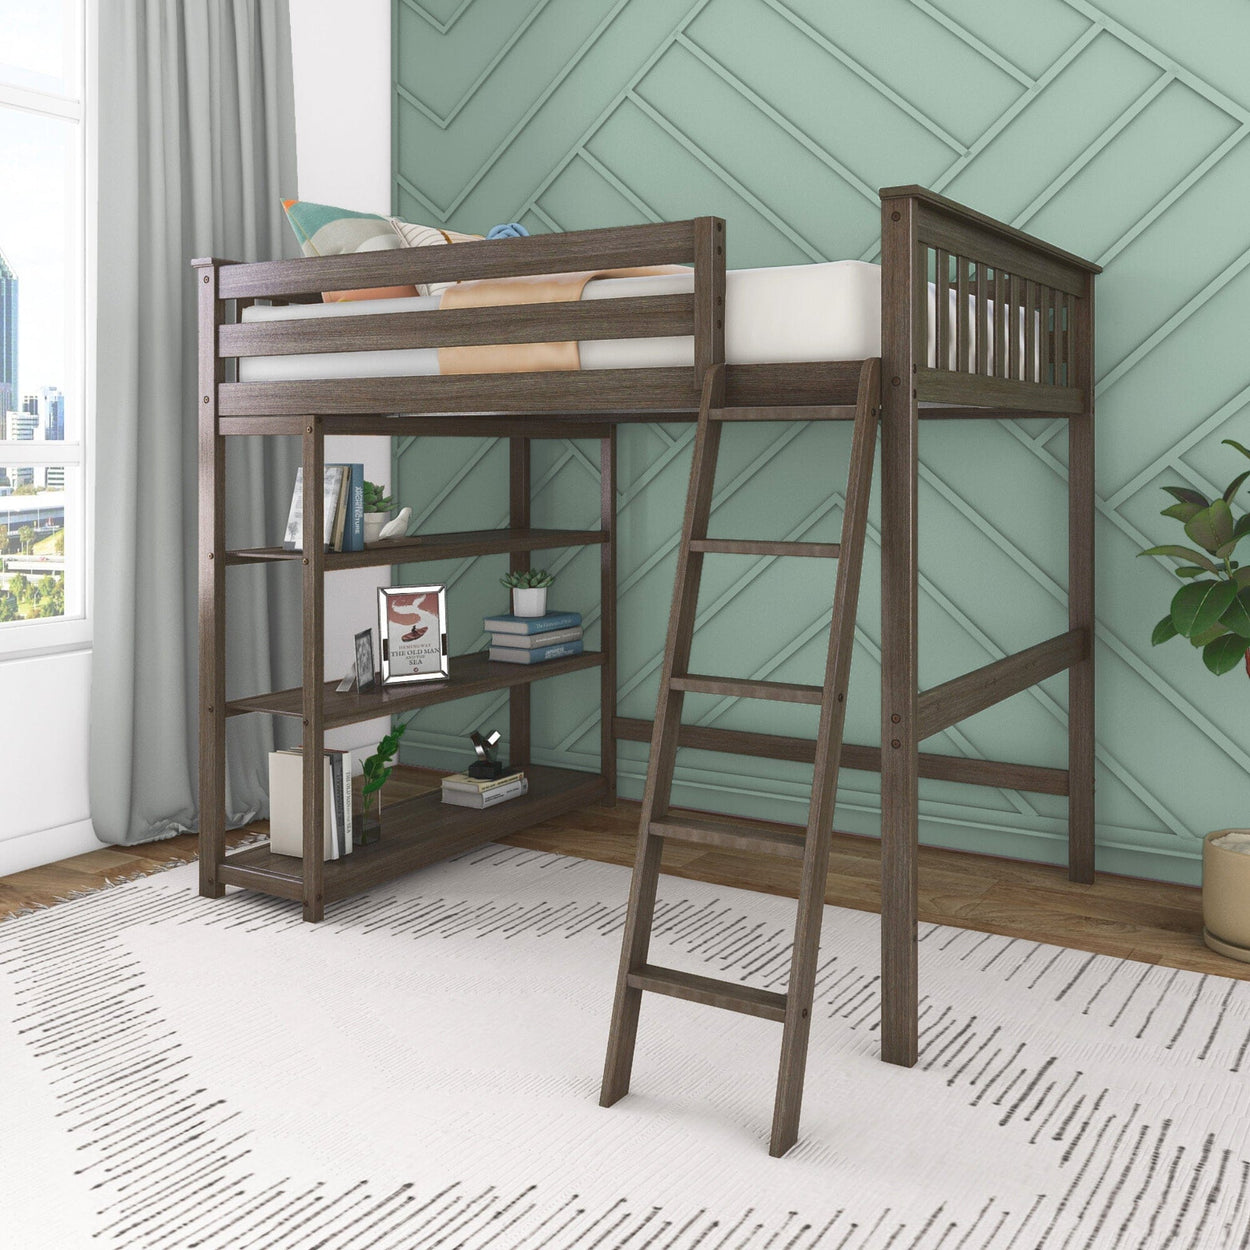 185247-151 : Storage & Study Loft Beds Full-Size High Loft Bed with Bookcase, Clay